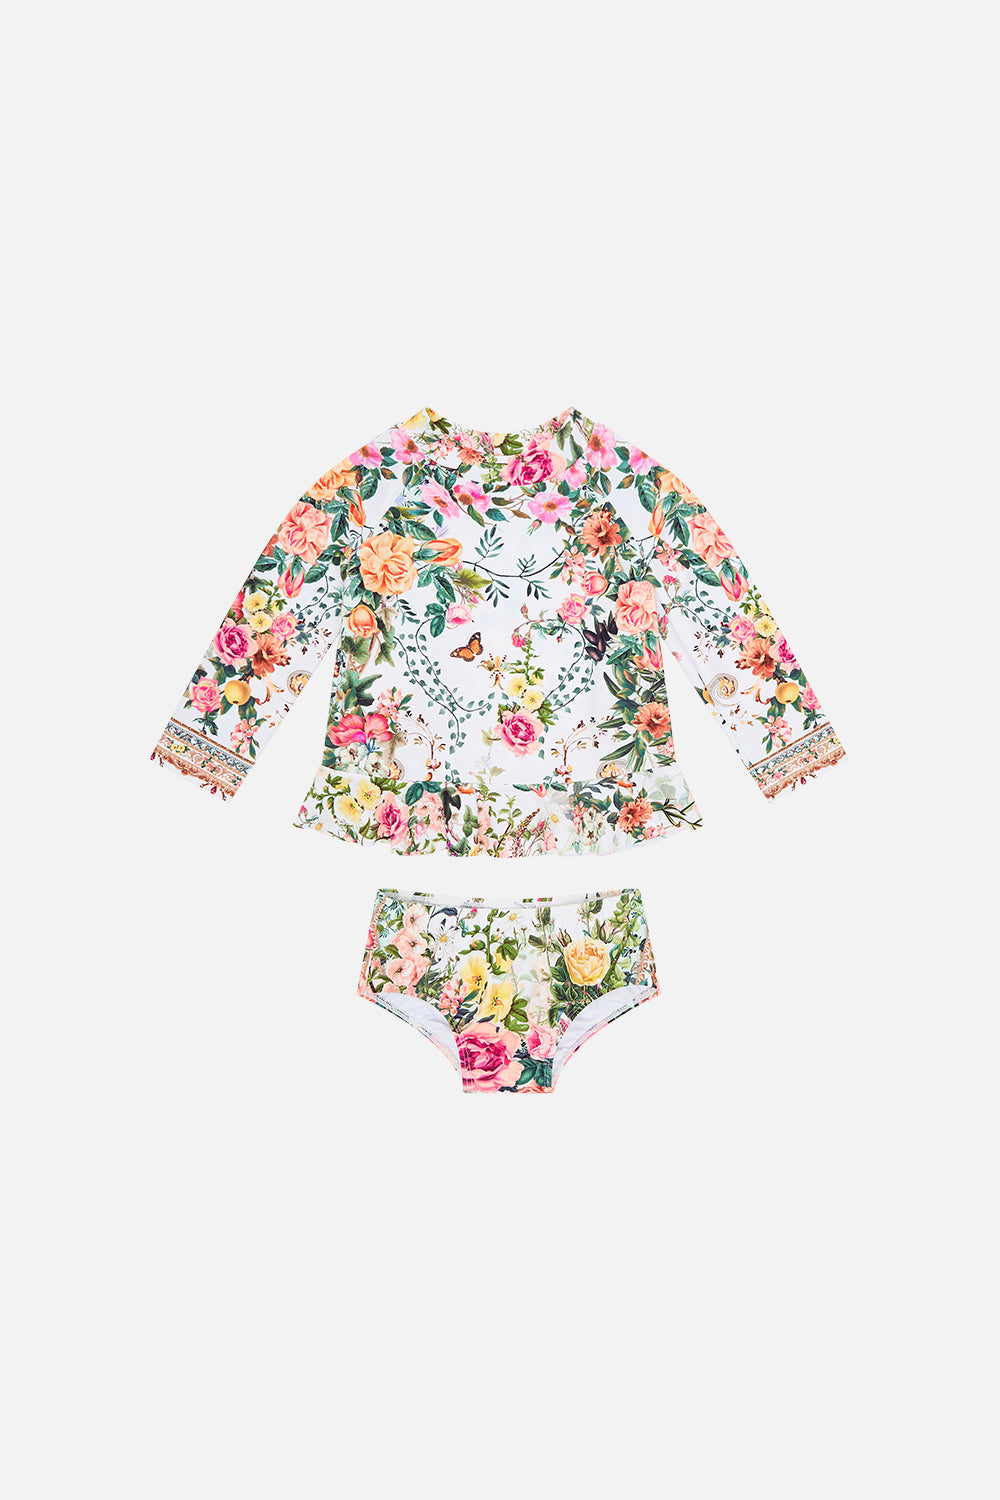 Product view of Milla By CAMILLA babies rashie set in Renaissance Romance print 